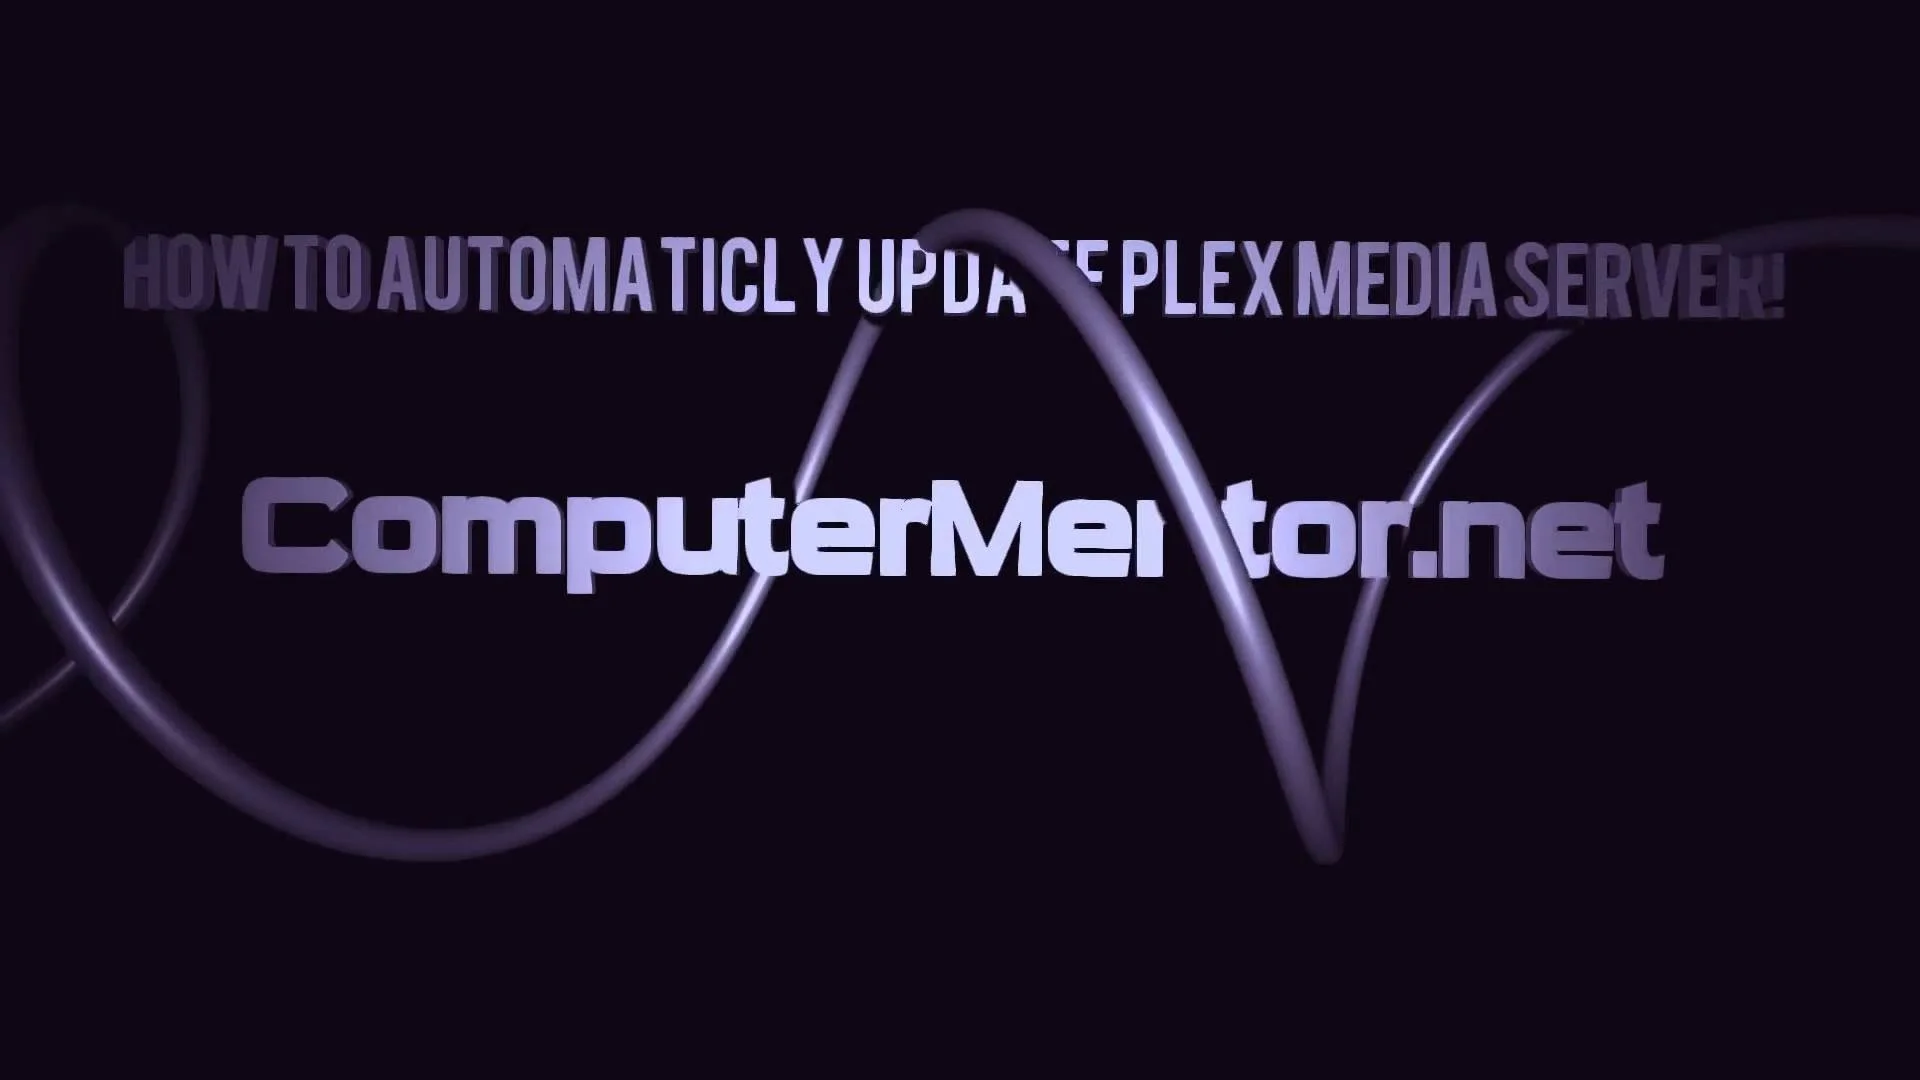 How to automaticly update Plex Media Server